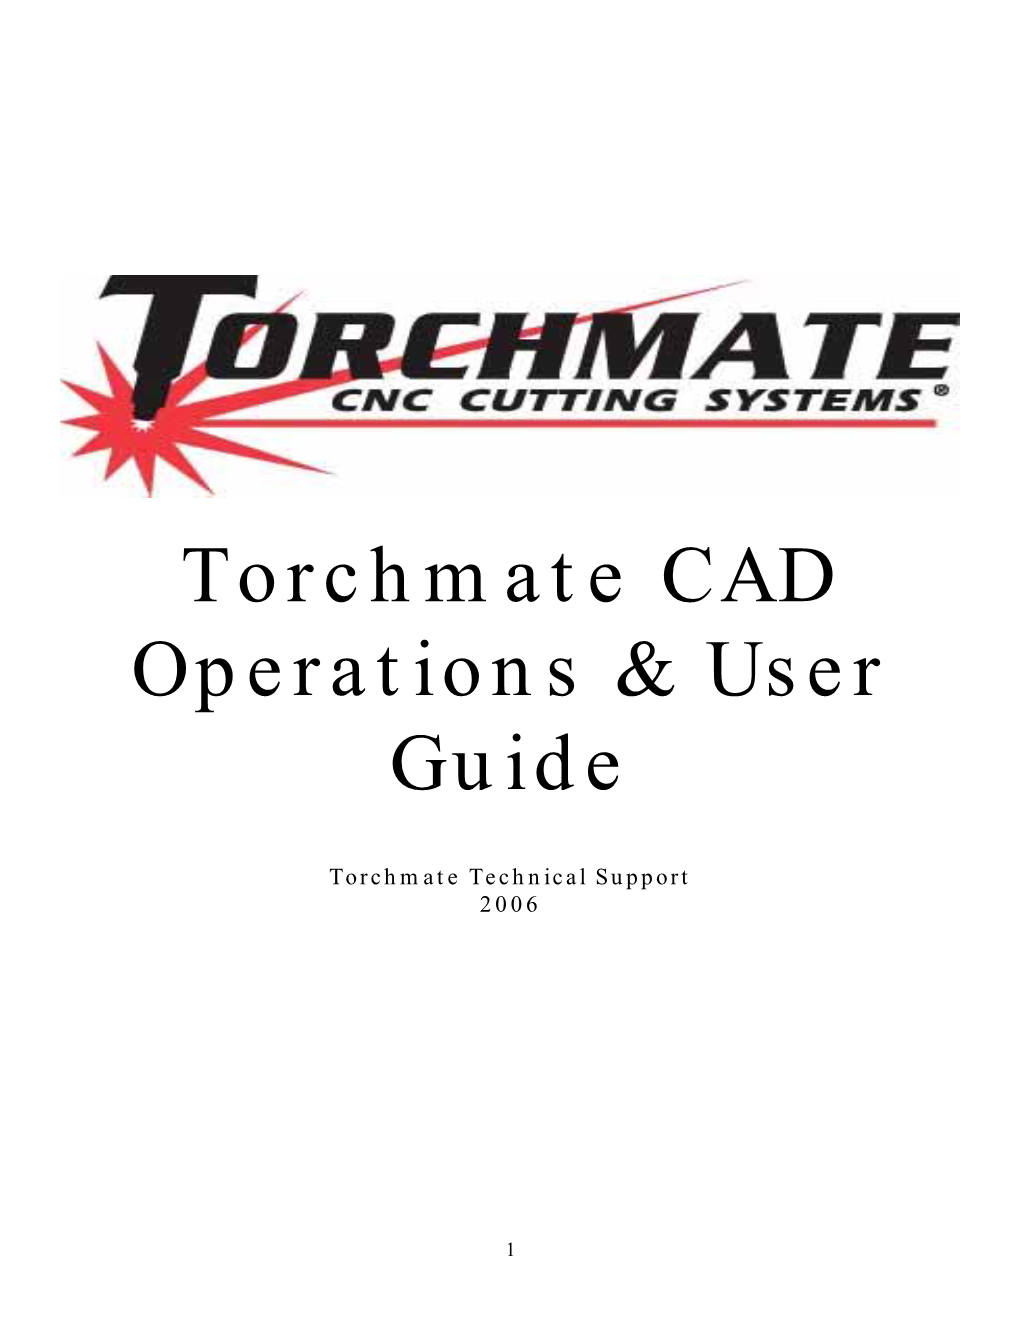 Torchmate CAD Operations & User Guide